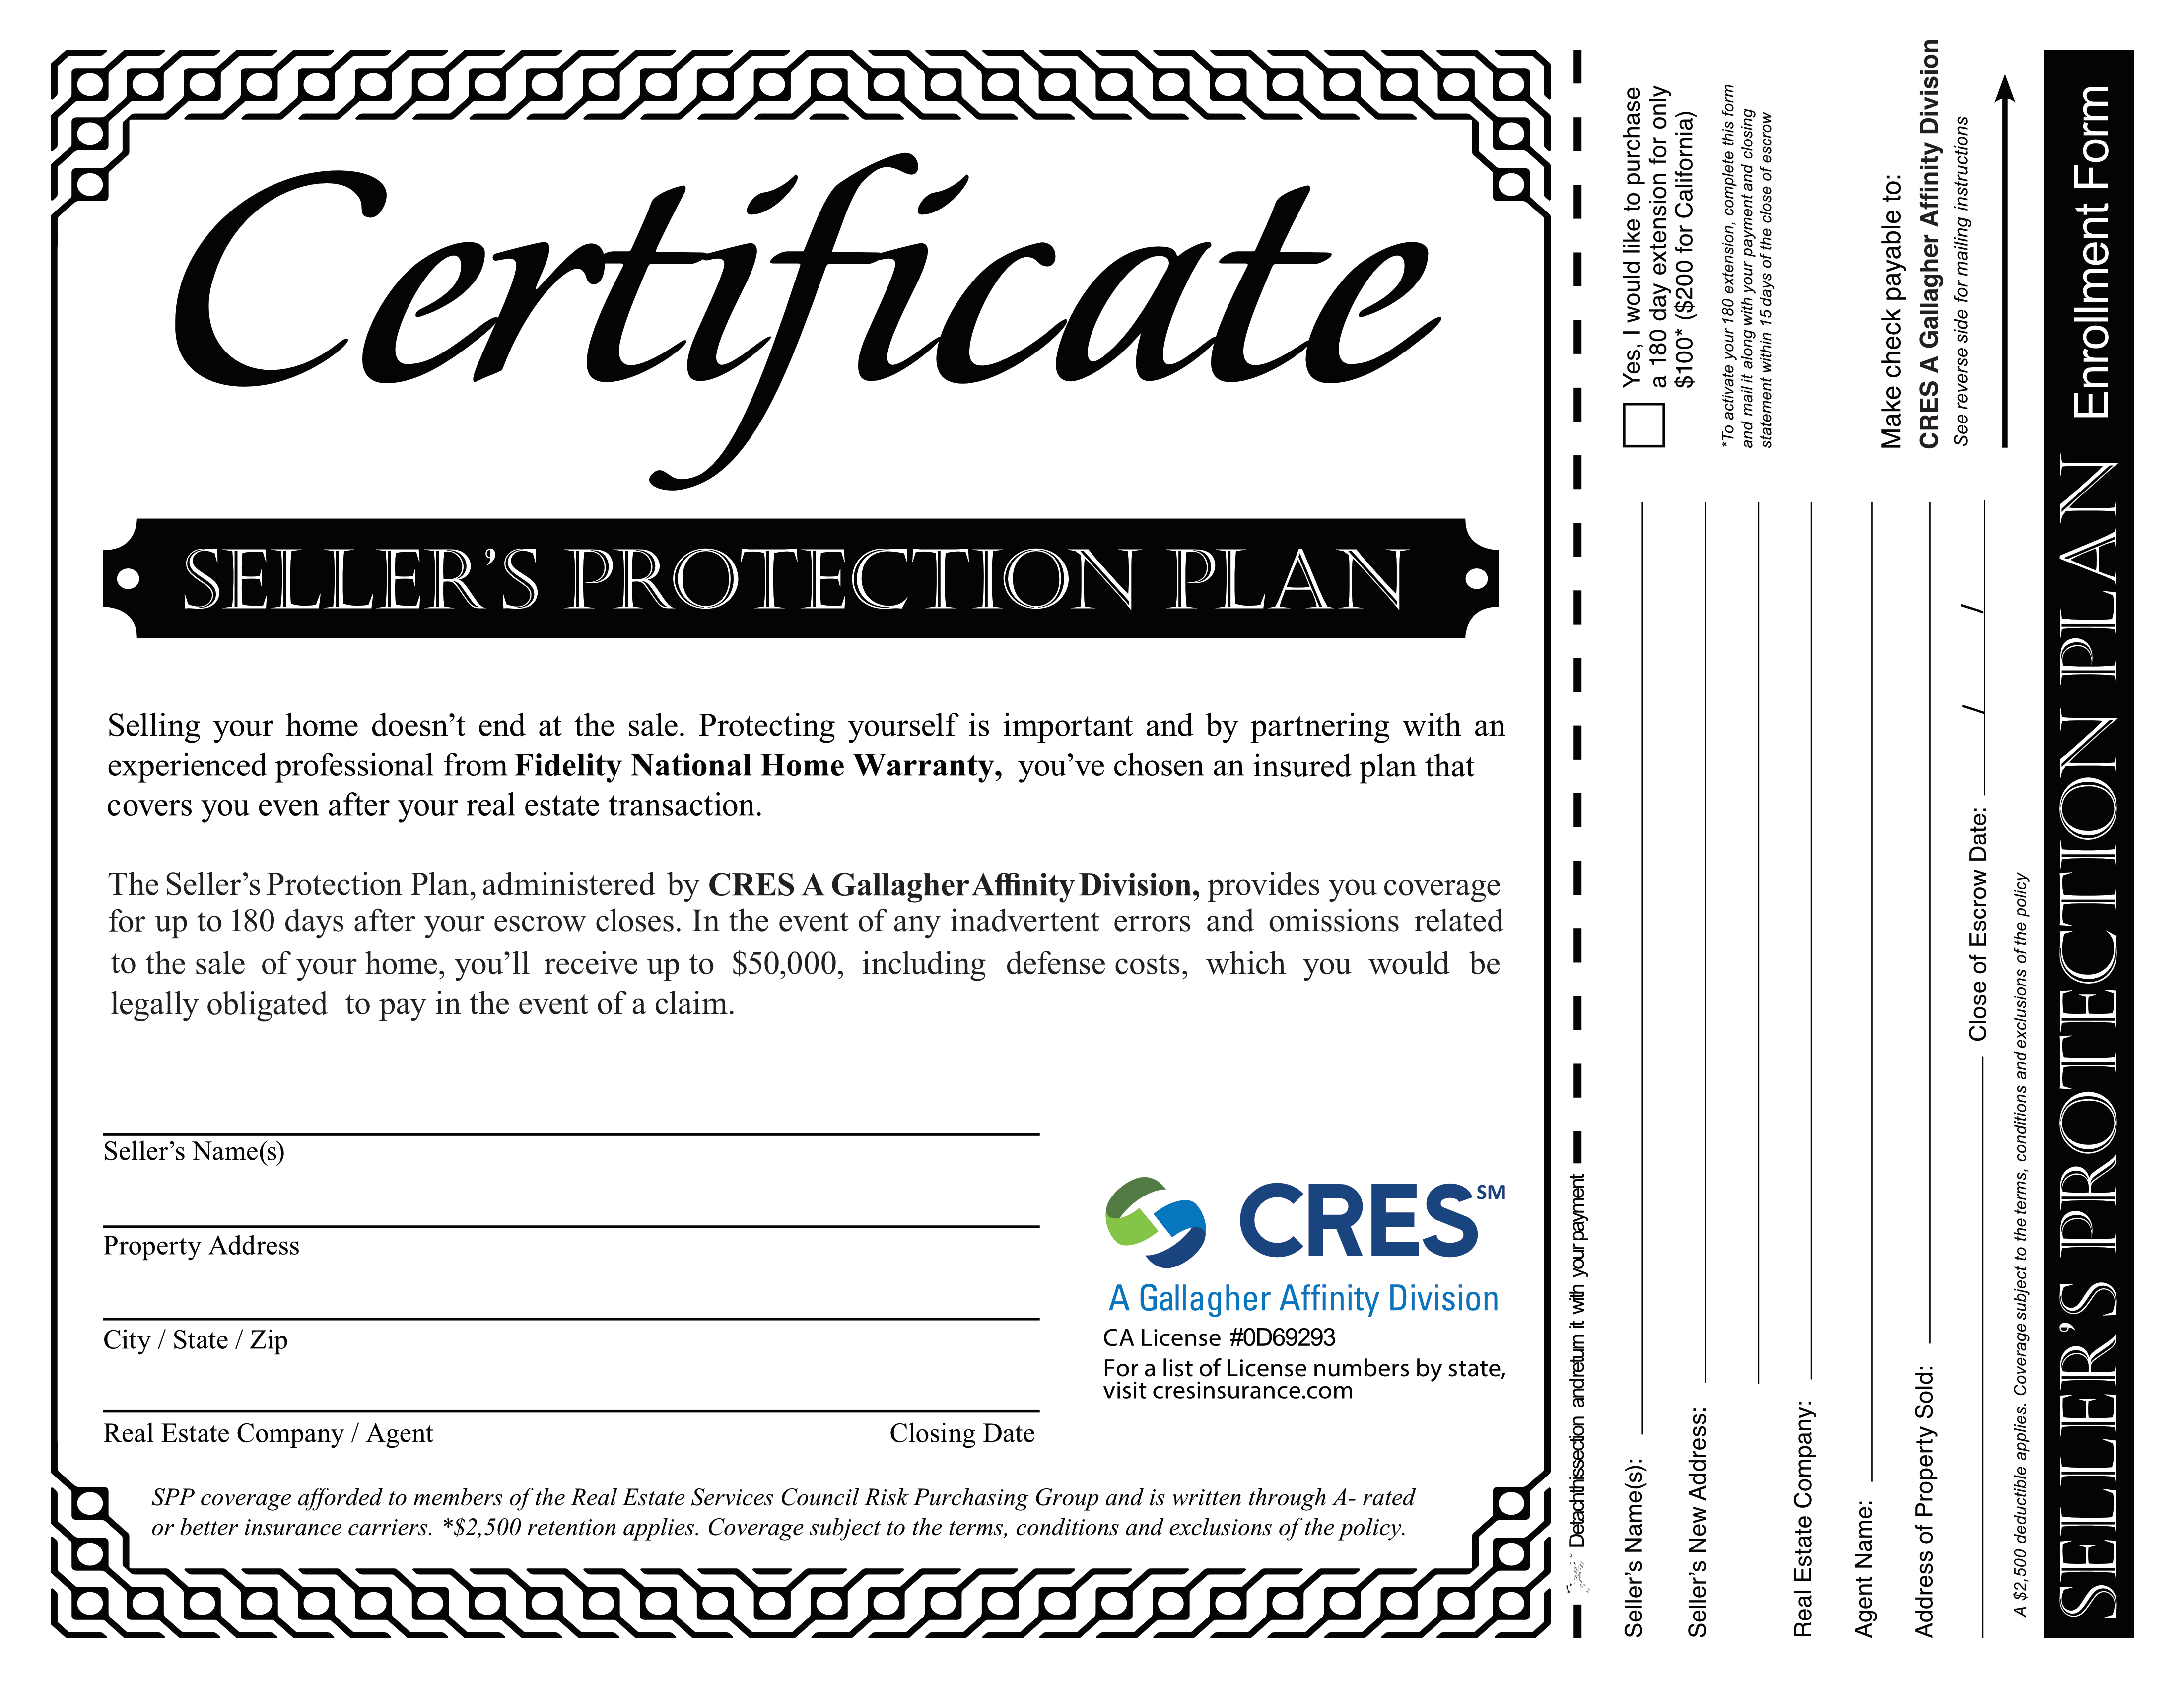 Certificate of CRES Seller's Protection Plan